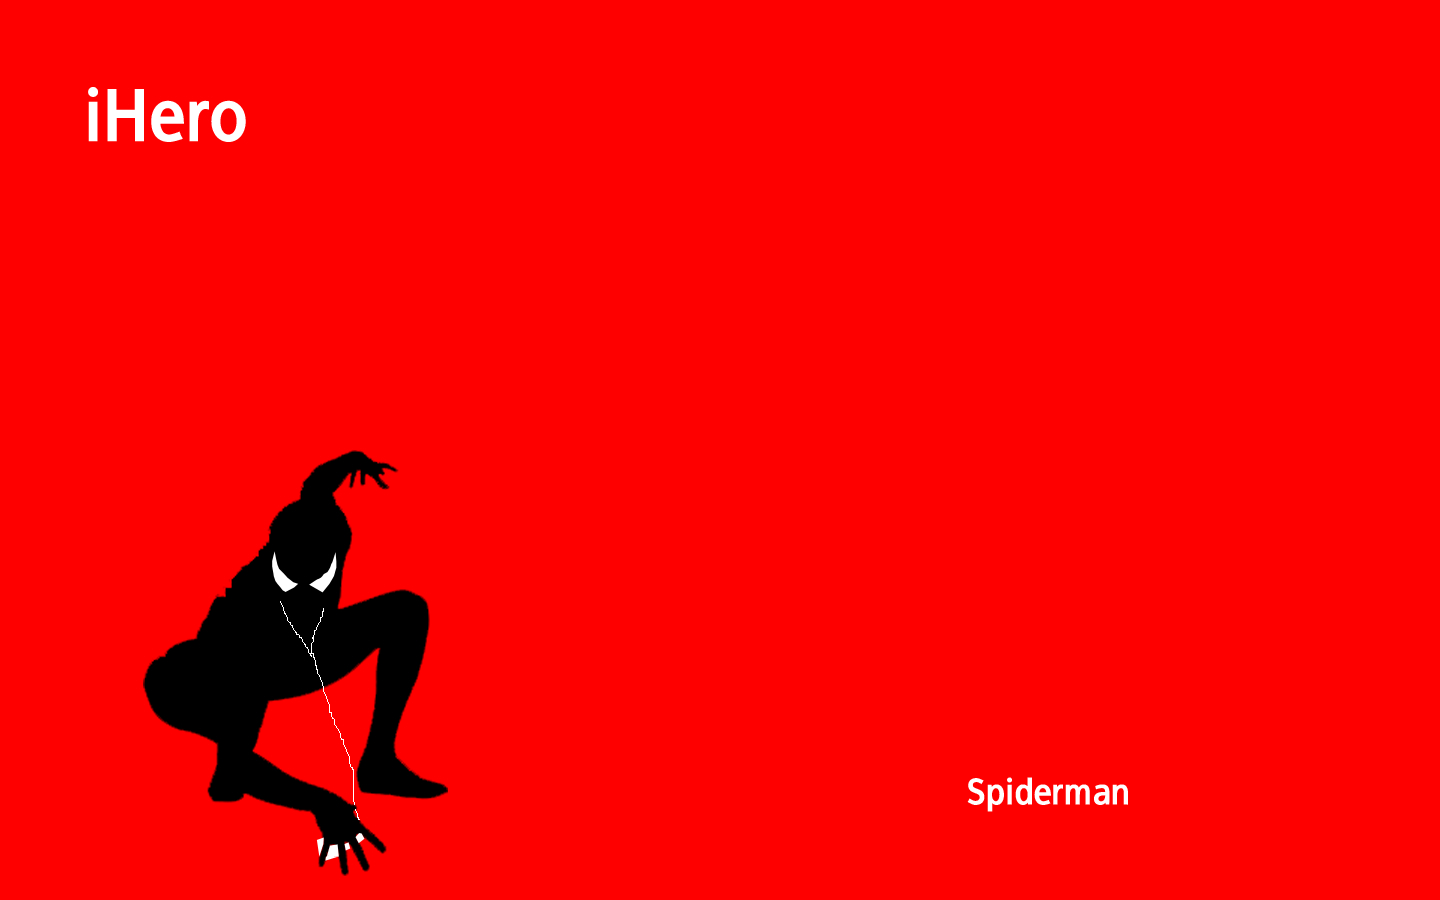 Wallpaper For Windows Xp Spiderman Ipod Style Background